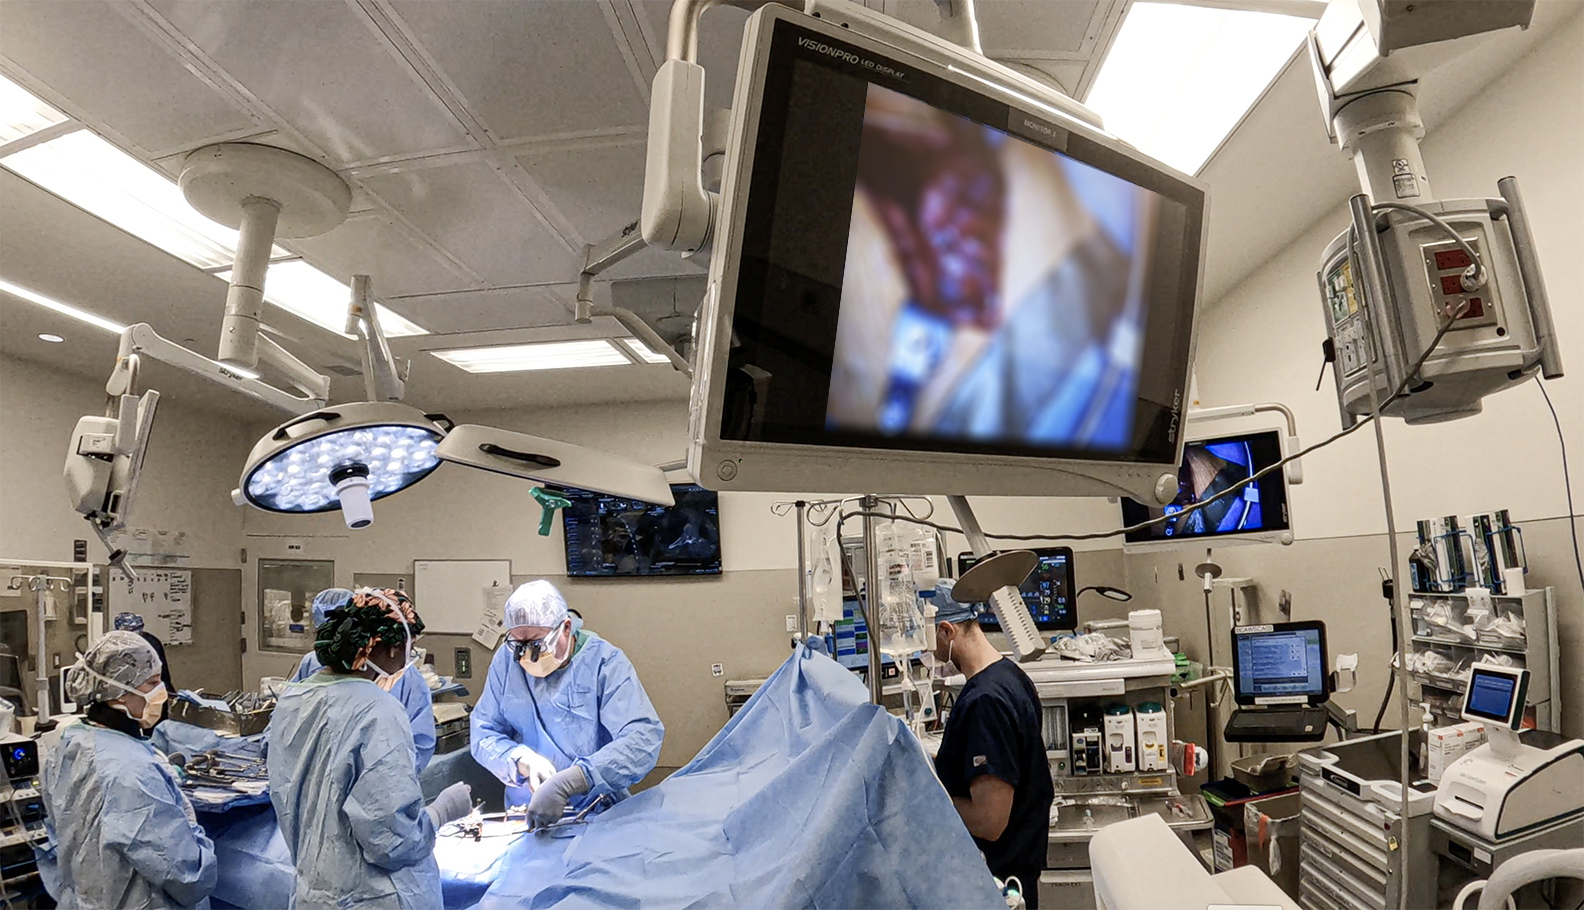 color photograph of operating room